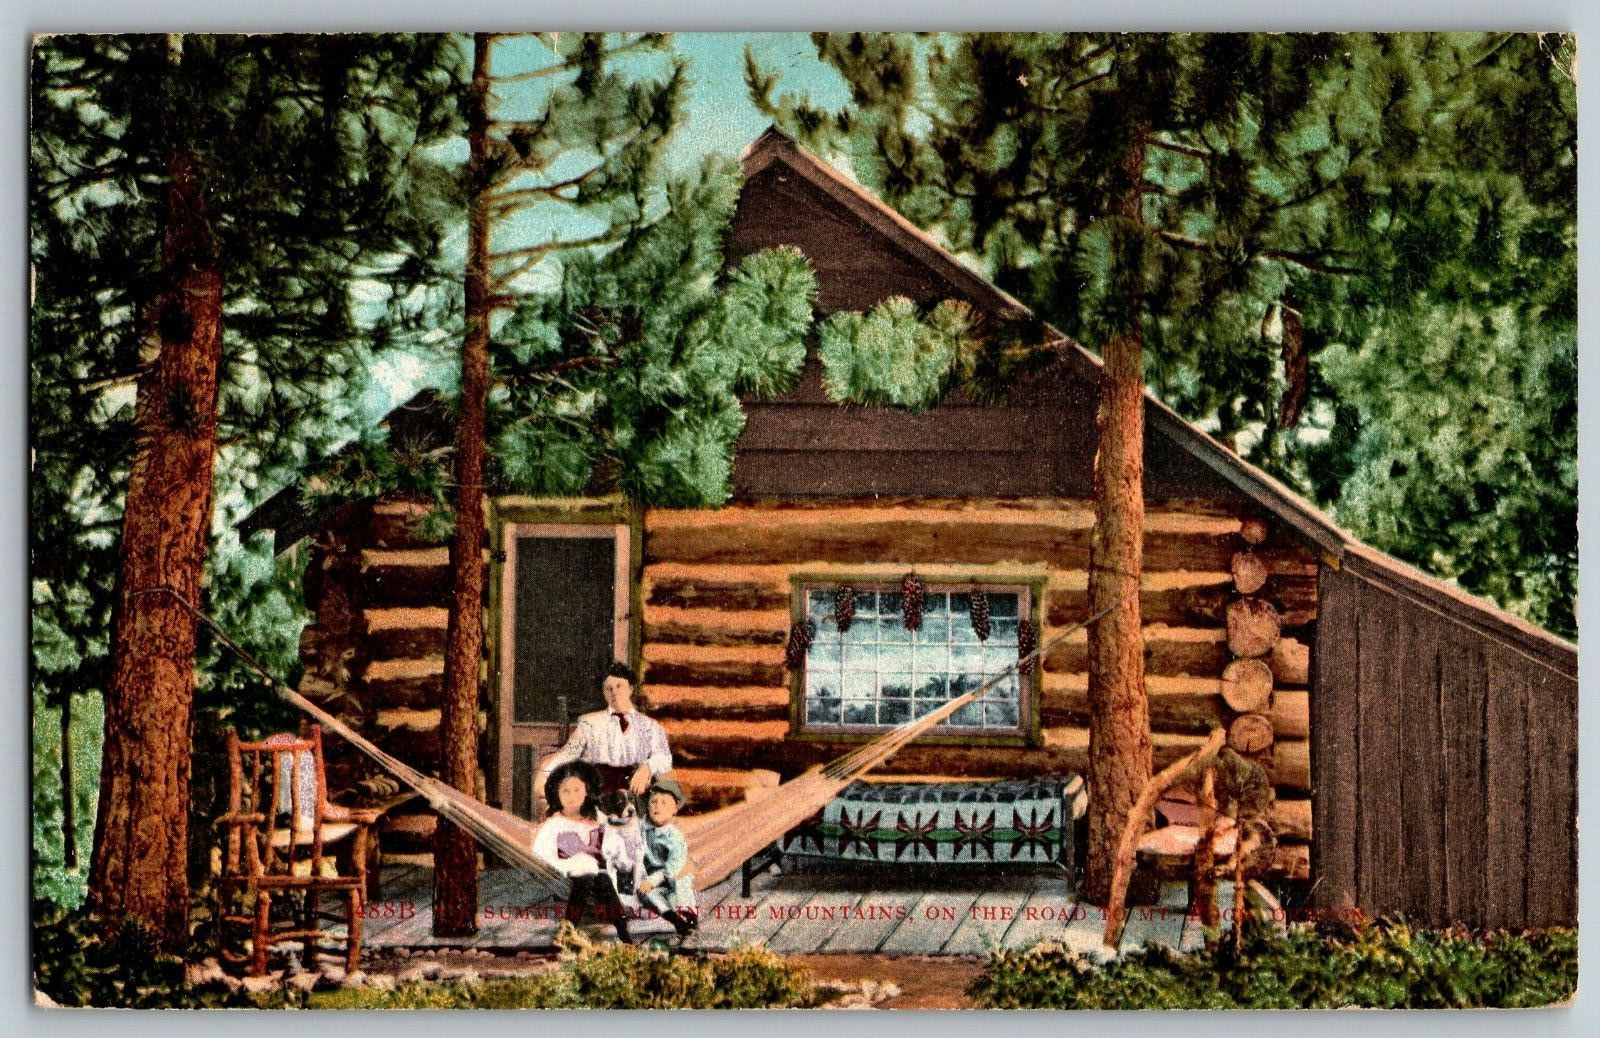 Mt. Hood, Oregon - Summit Home in the Mountain - Vintage Postcard - Posted